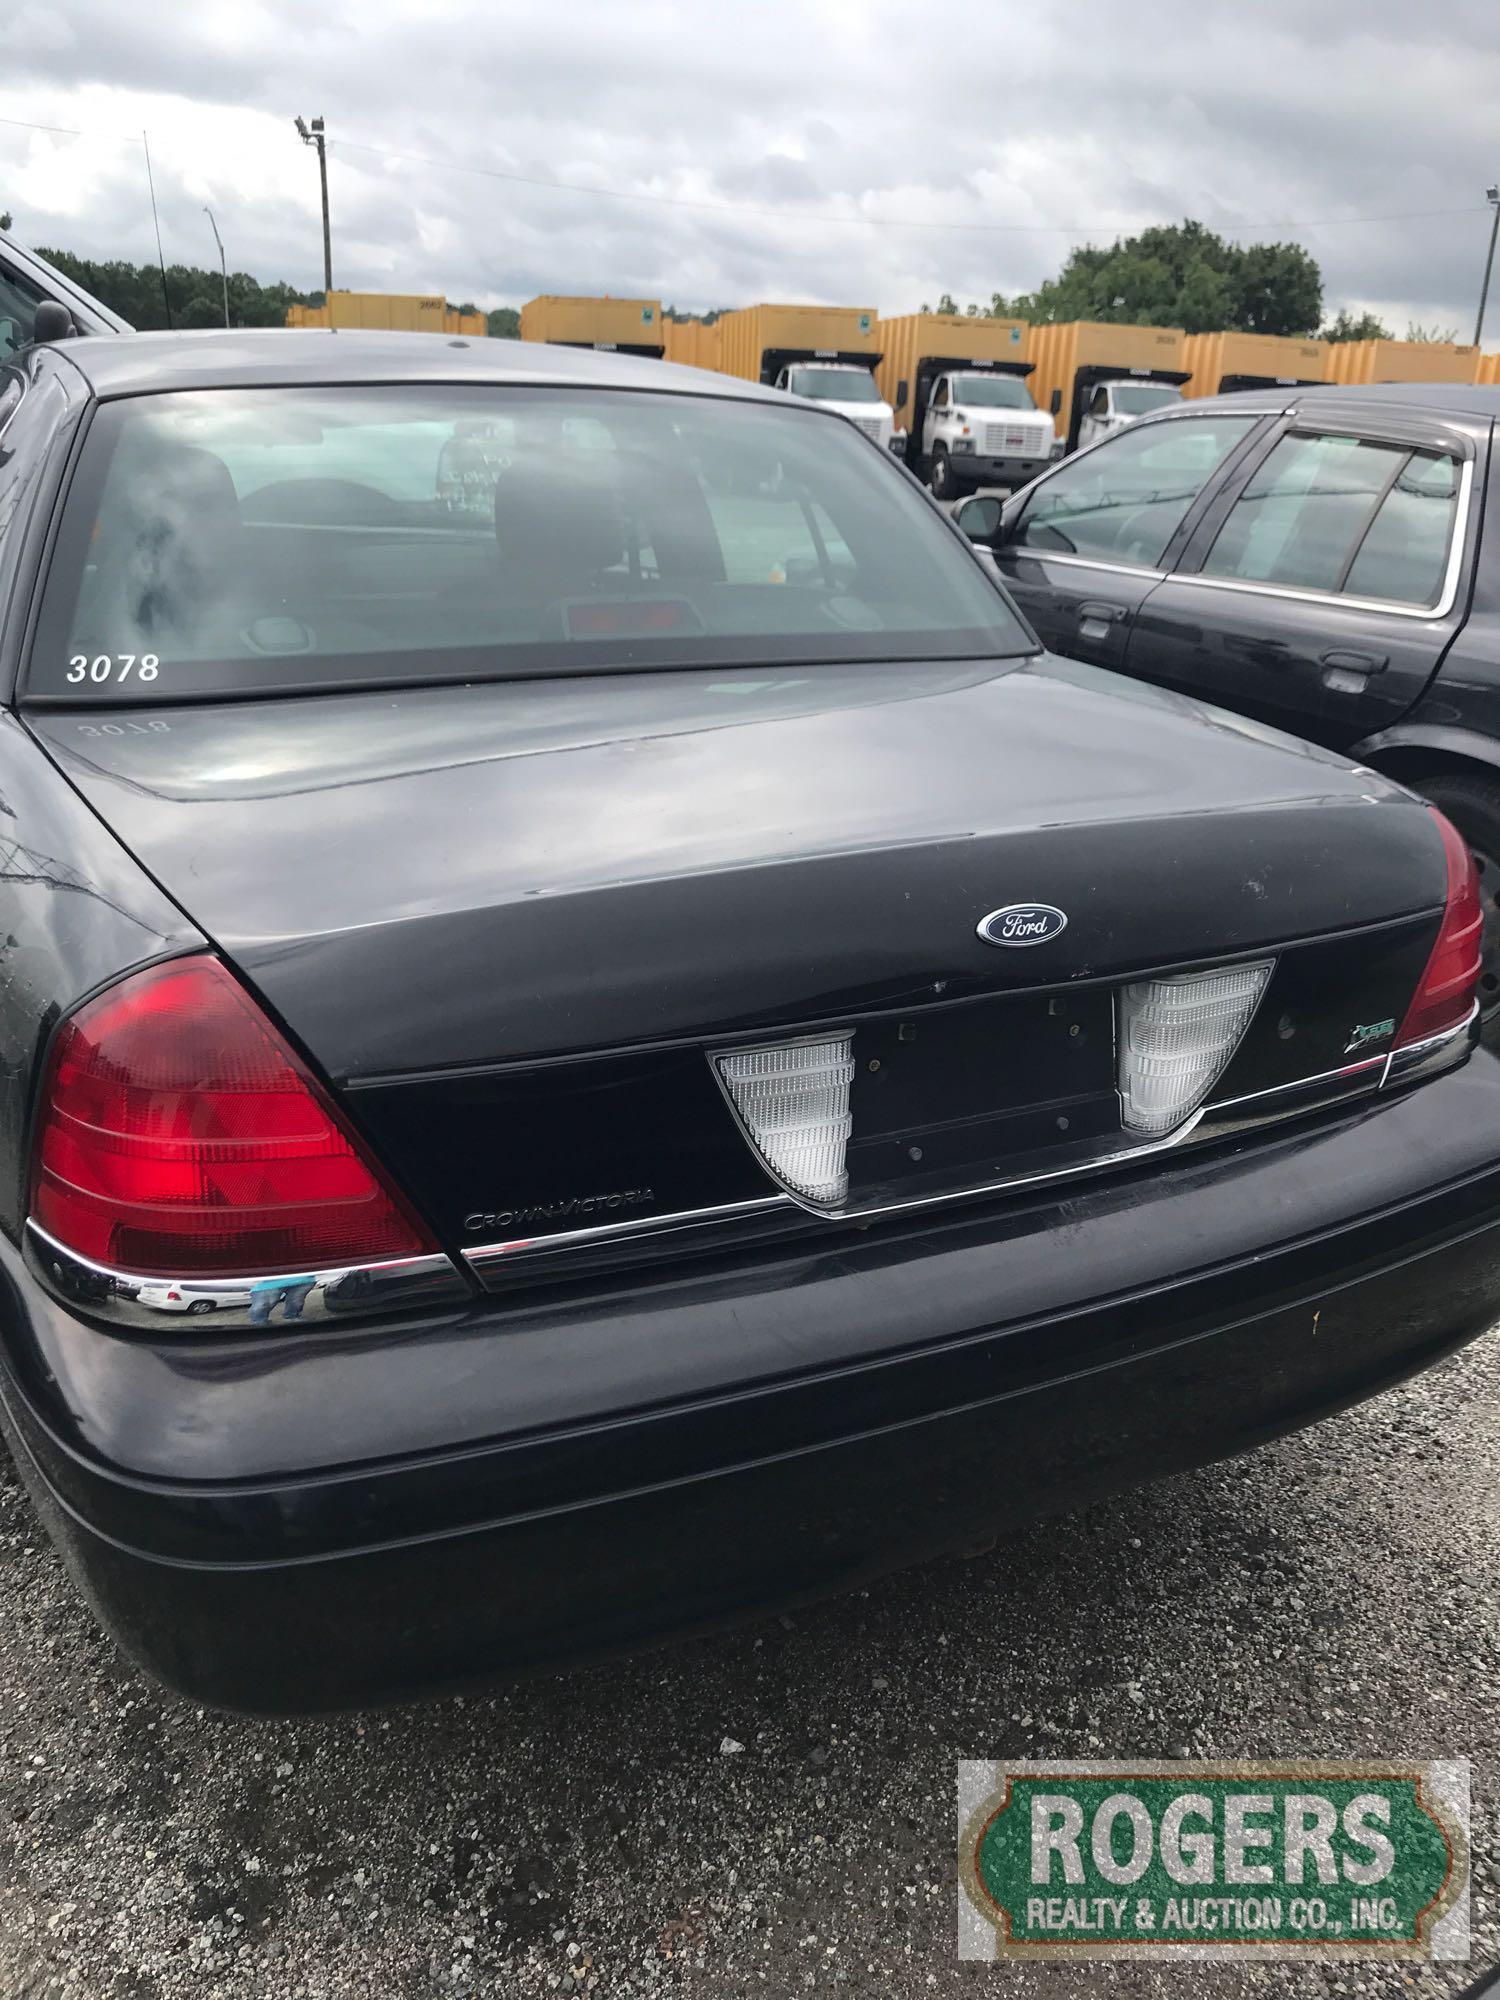 2009 Ford Crown Vic, 4.6, 92482 miles, No Console, Hit Front Panel, 2FAHP71V19X125434